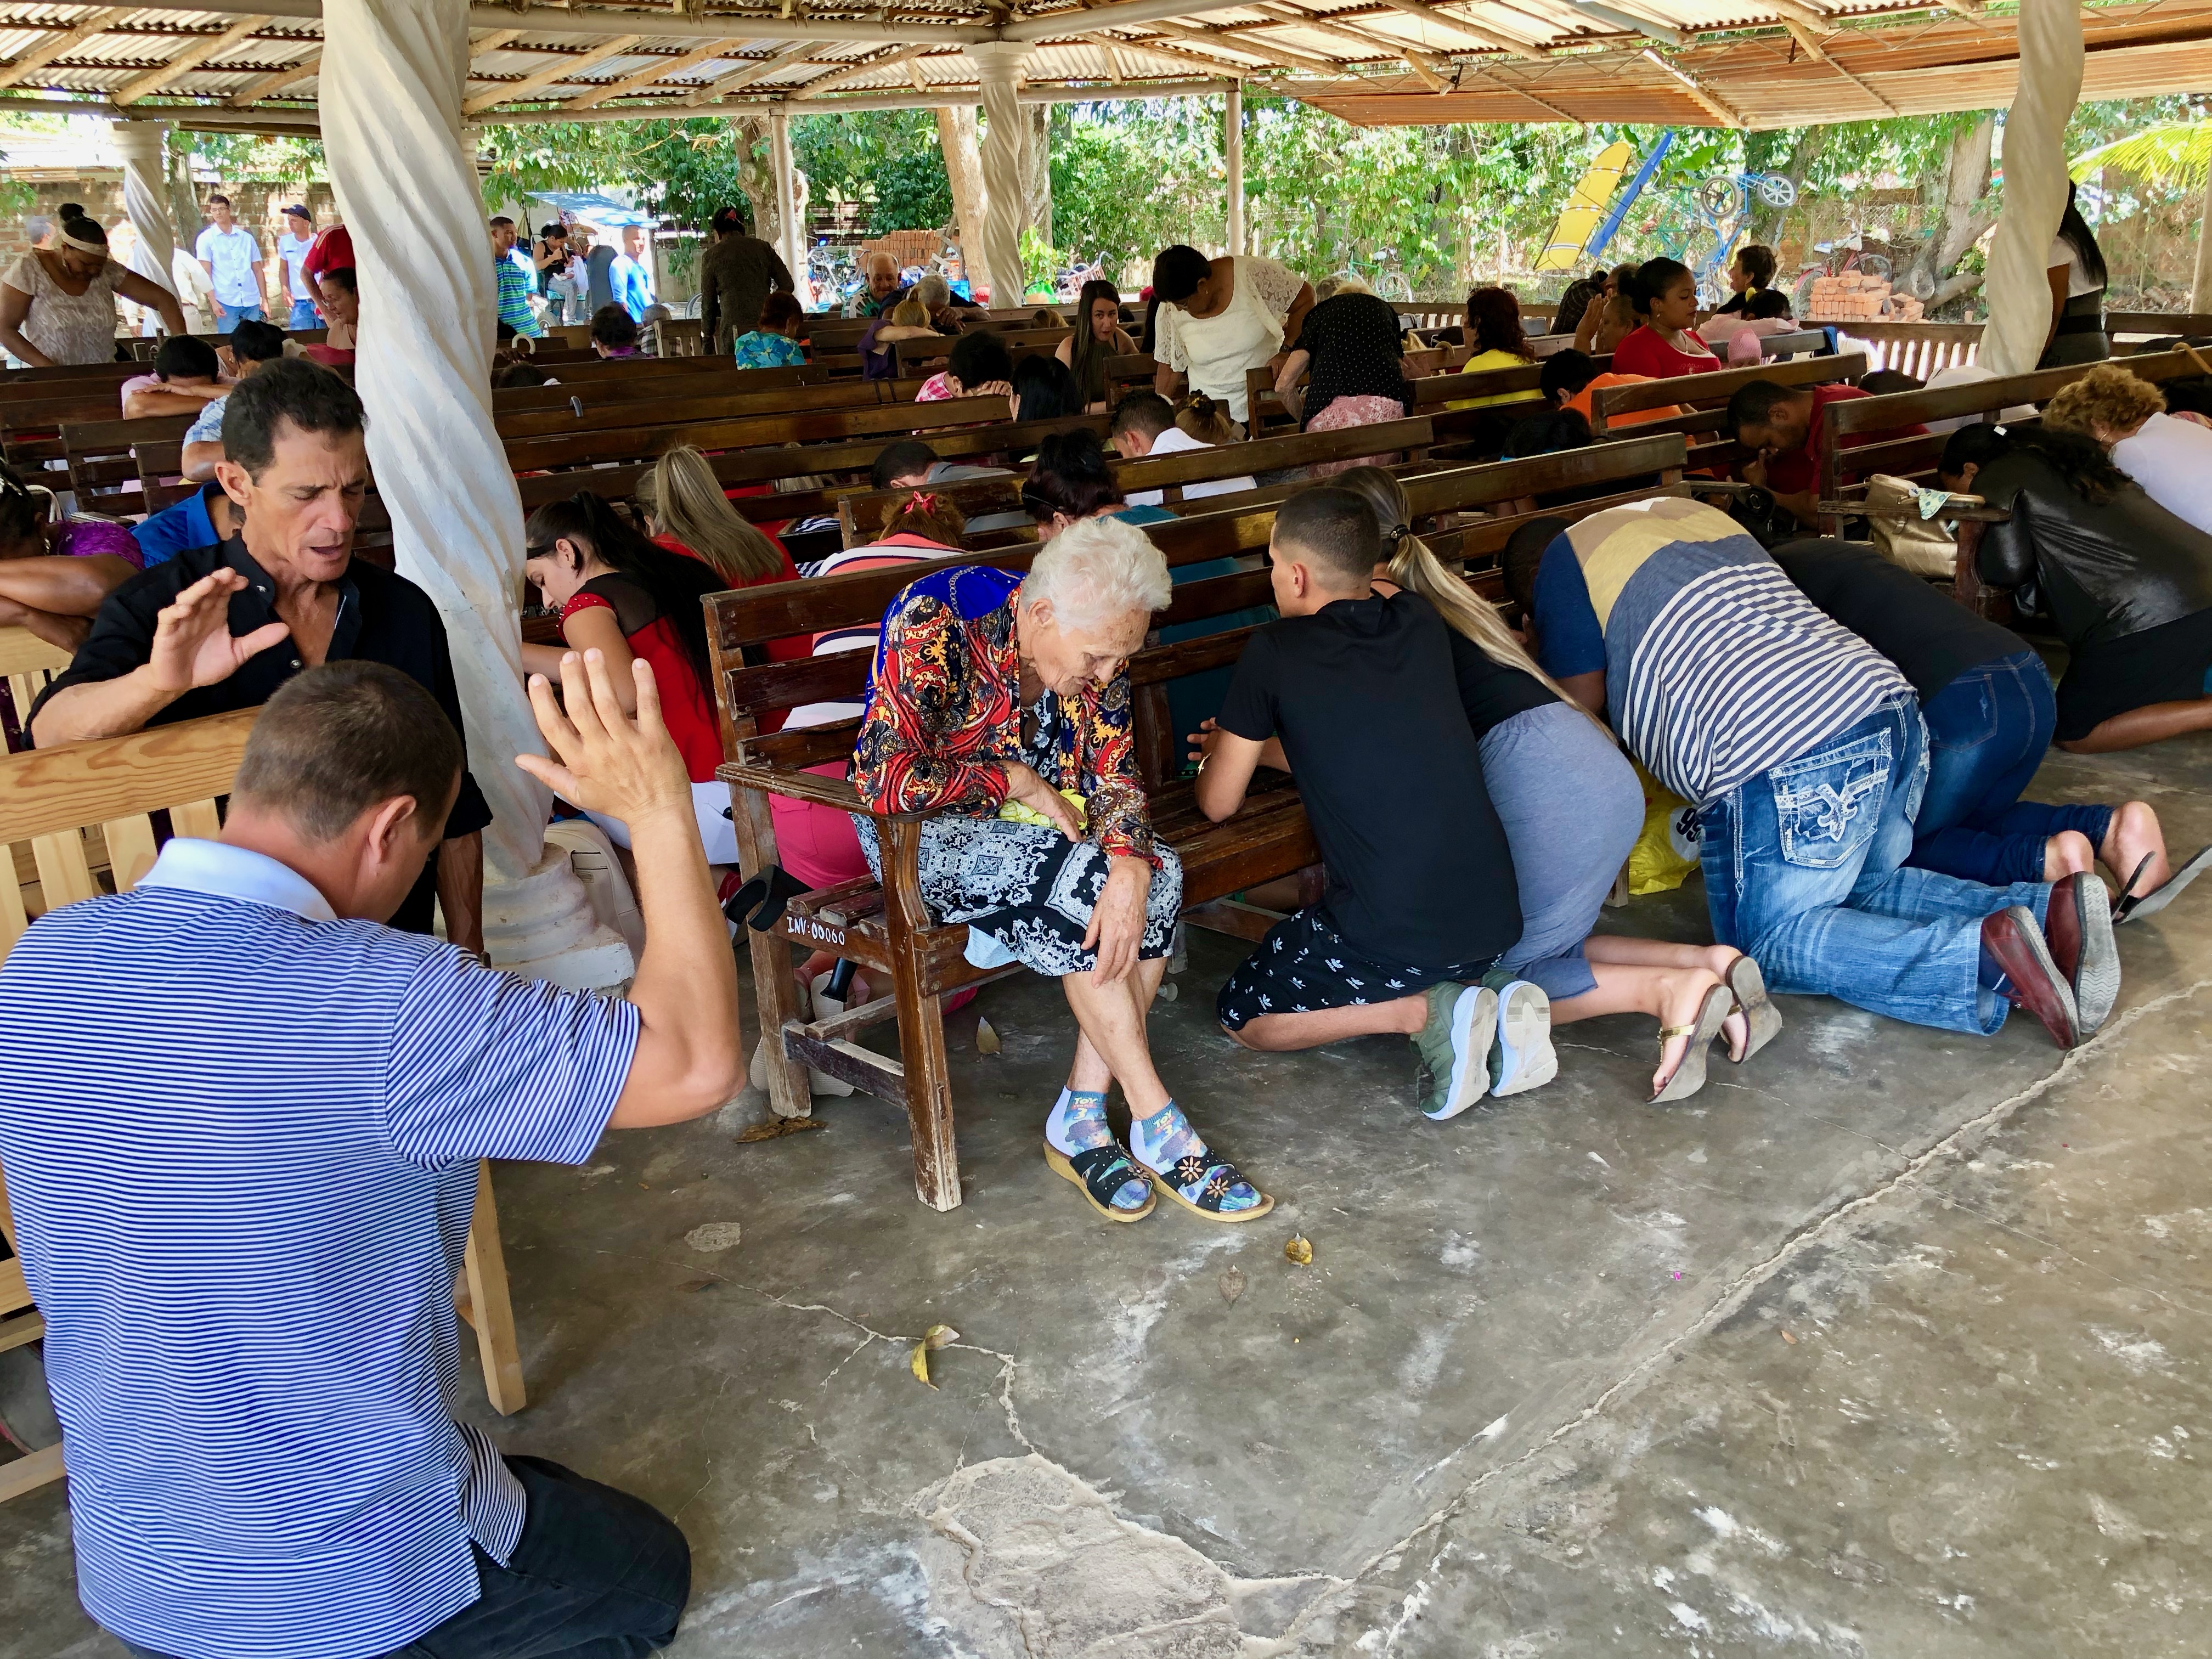 Prayer in Camaguey. These people are warriors!